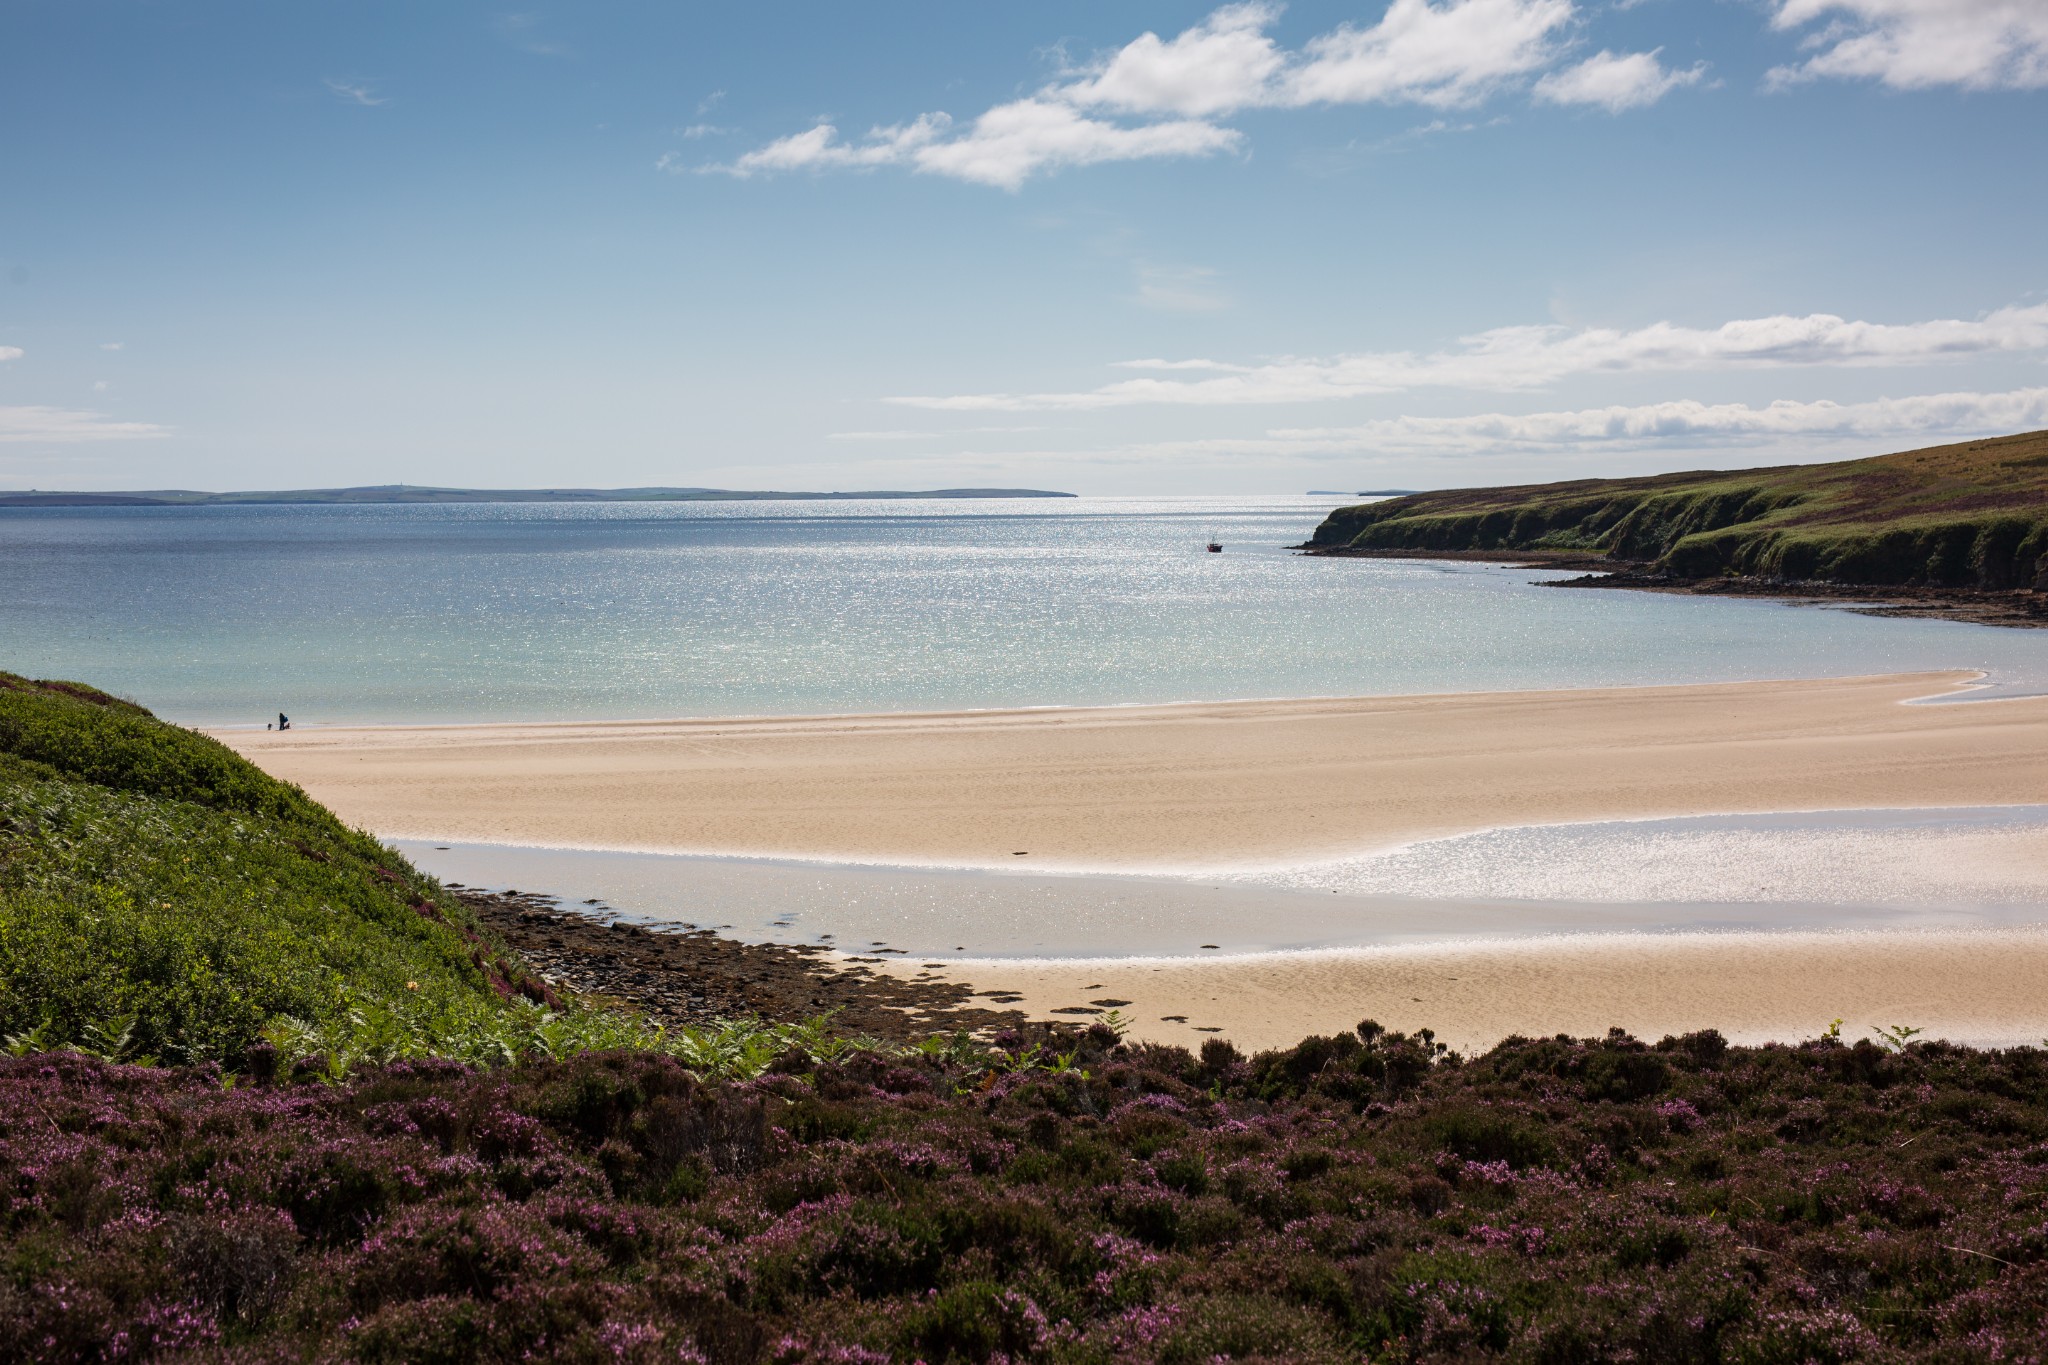 View over Waulkmill beach, Orkney